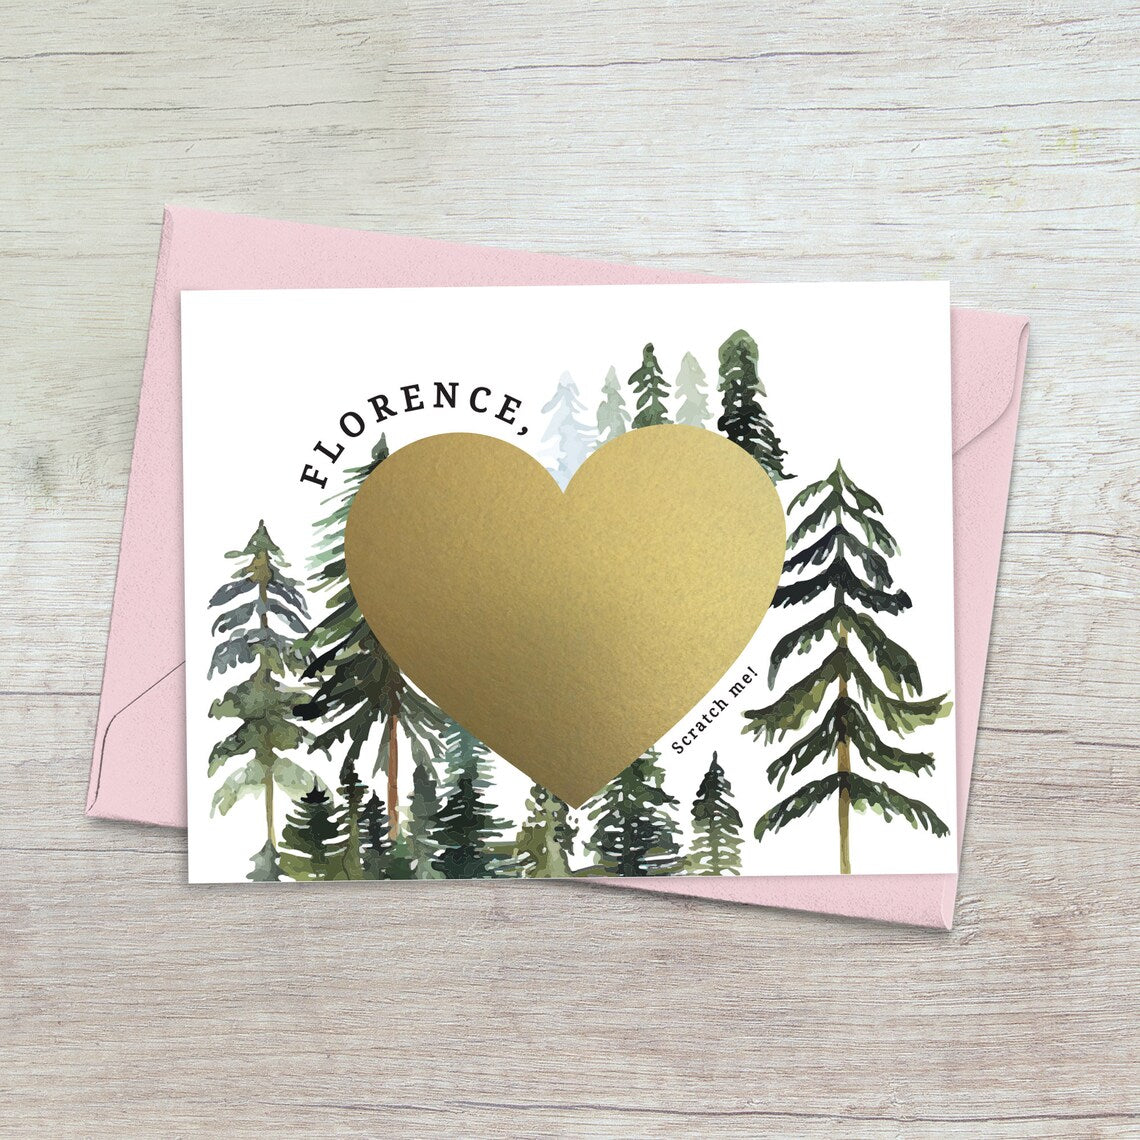 will you be my bridesmaid proposal card with rustic pine trees design and gold foiled cratch off heart in the middle. 